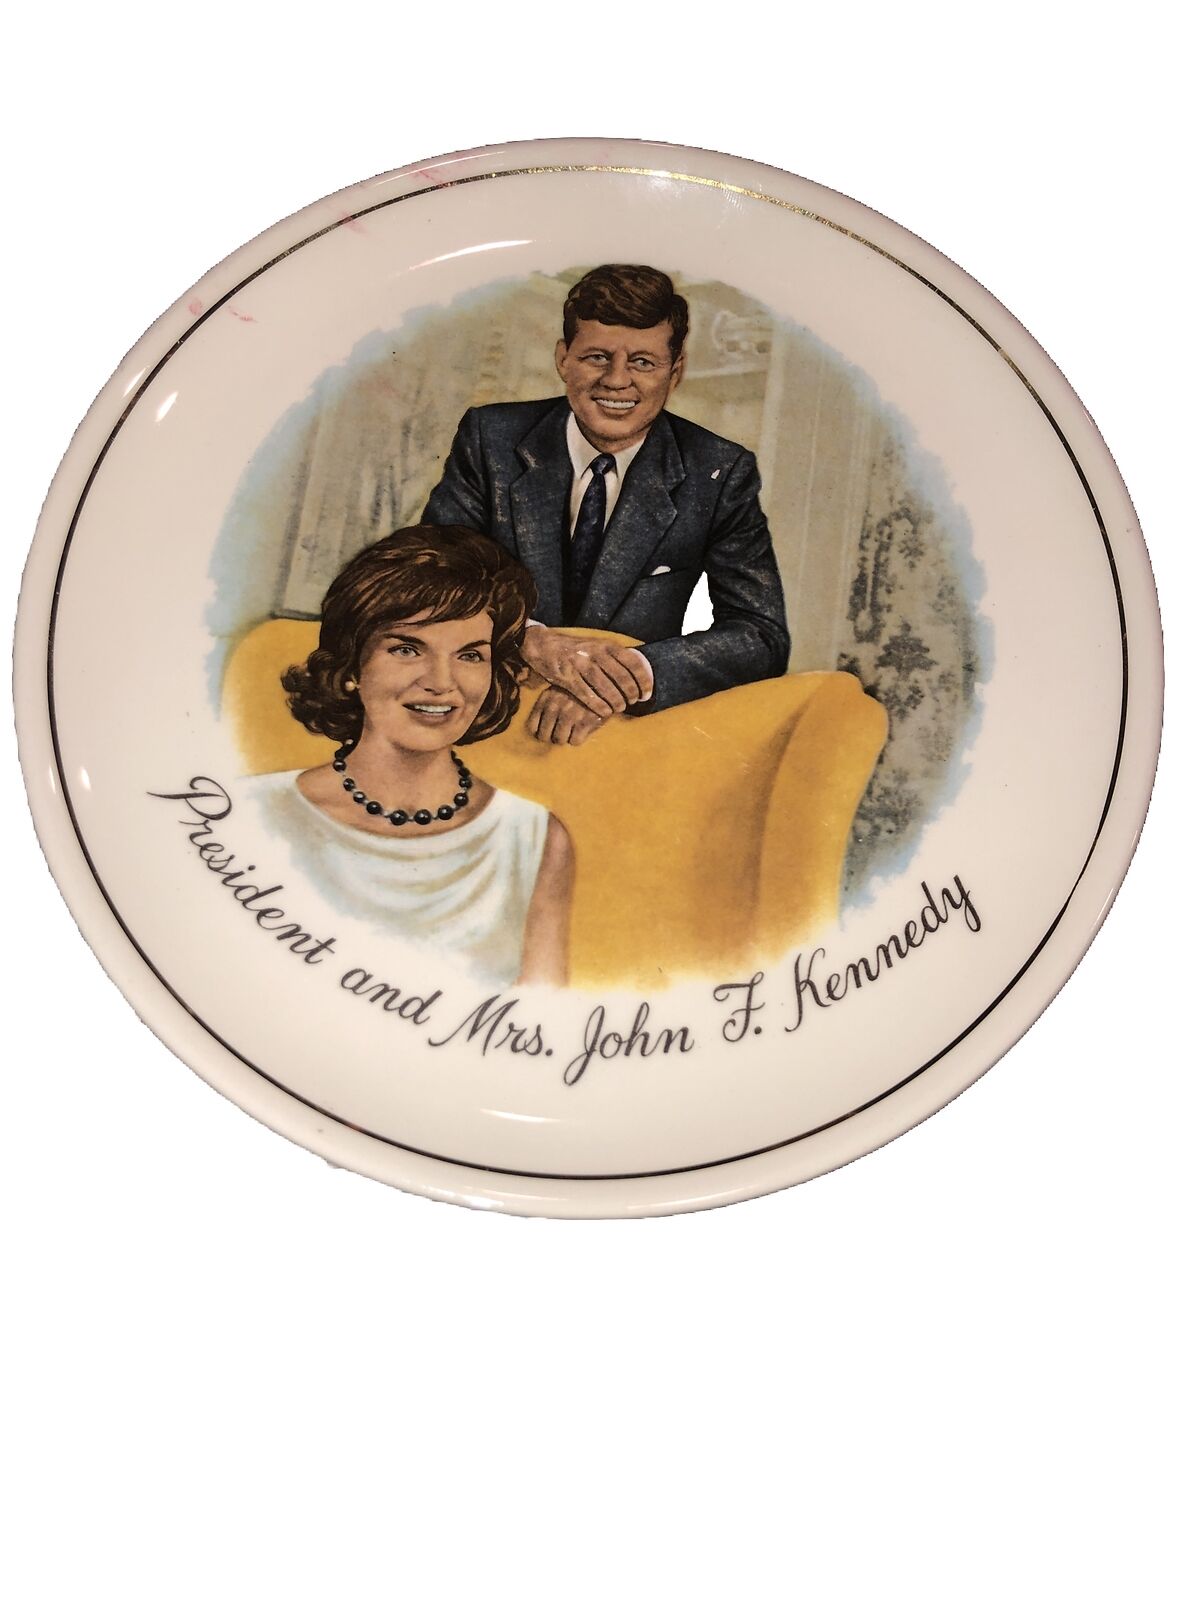 Vintage President and Mrs. John F. Kennedy decorative plate 1960s